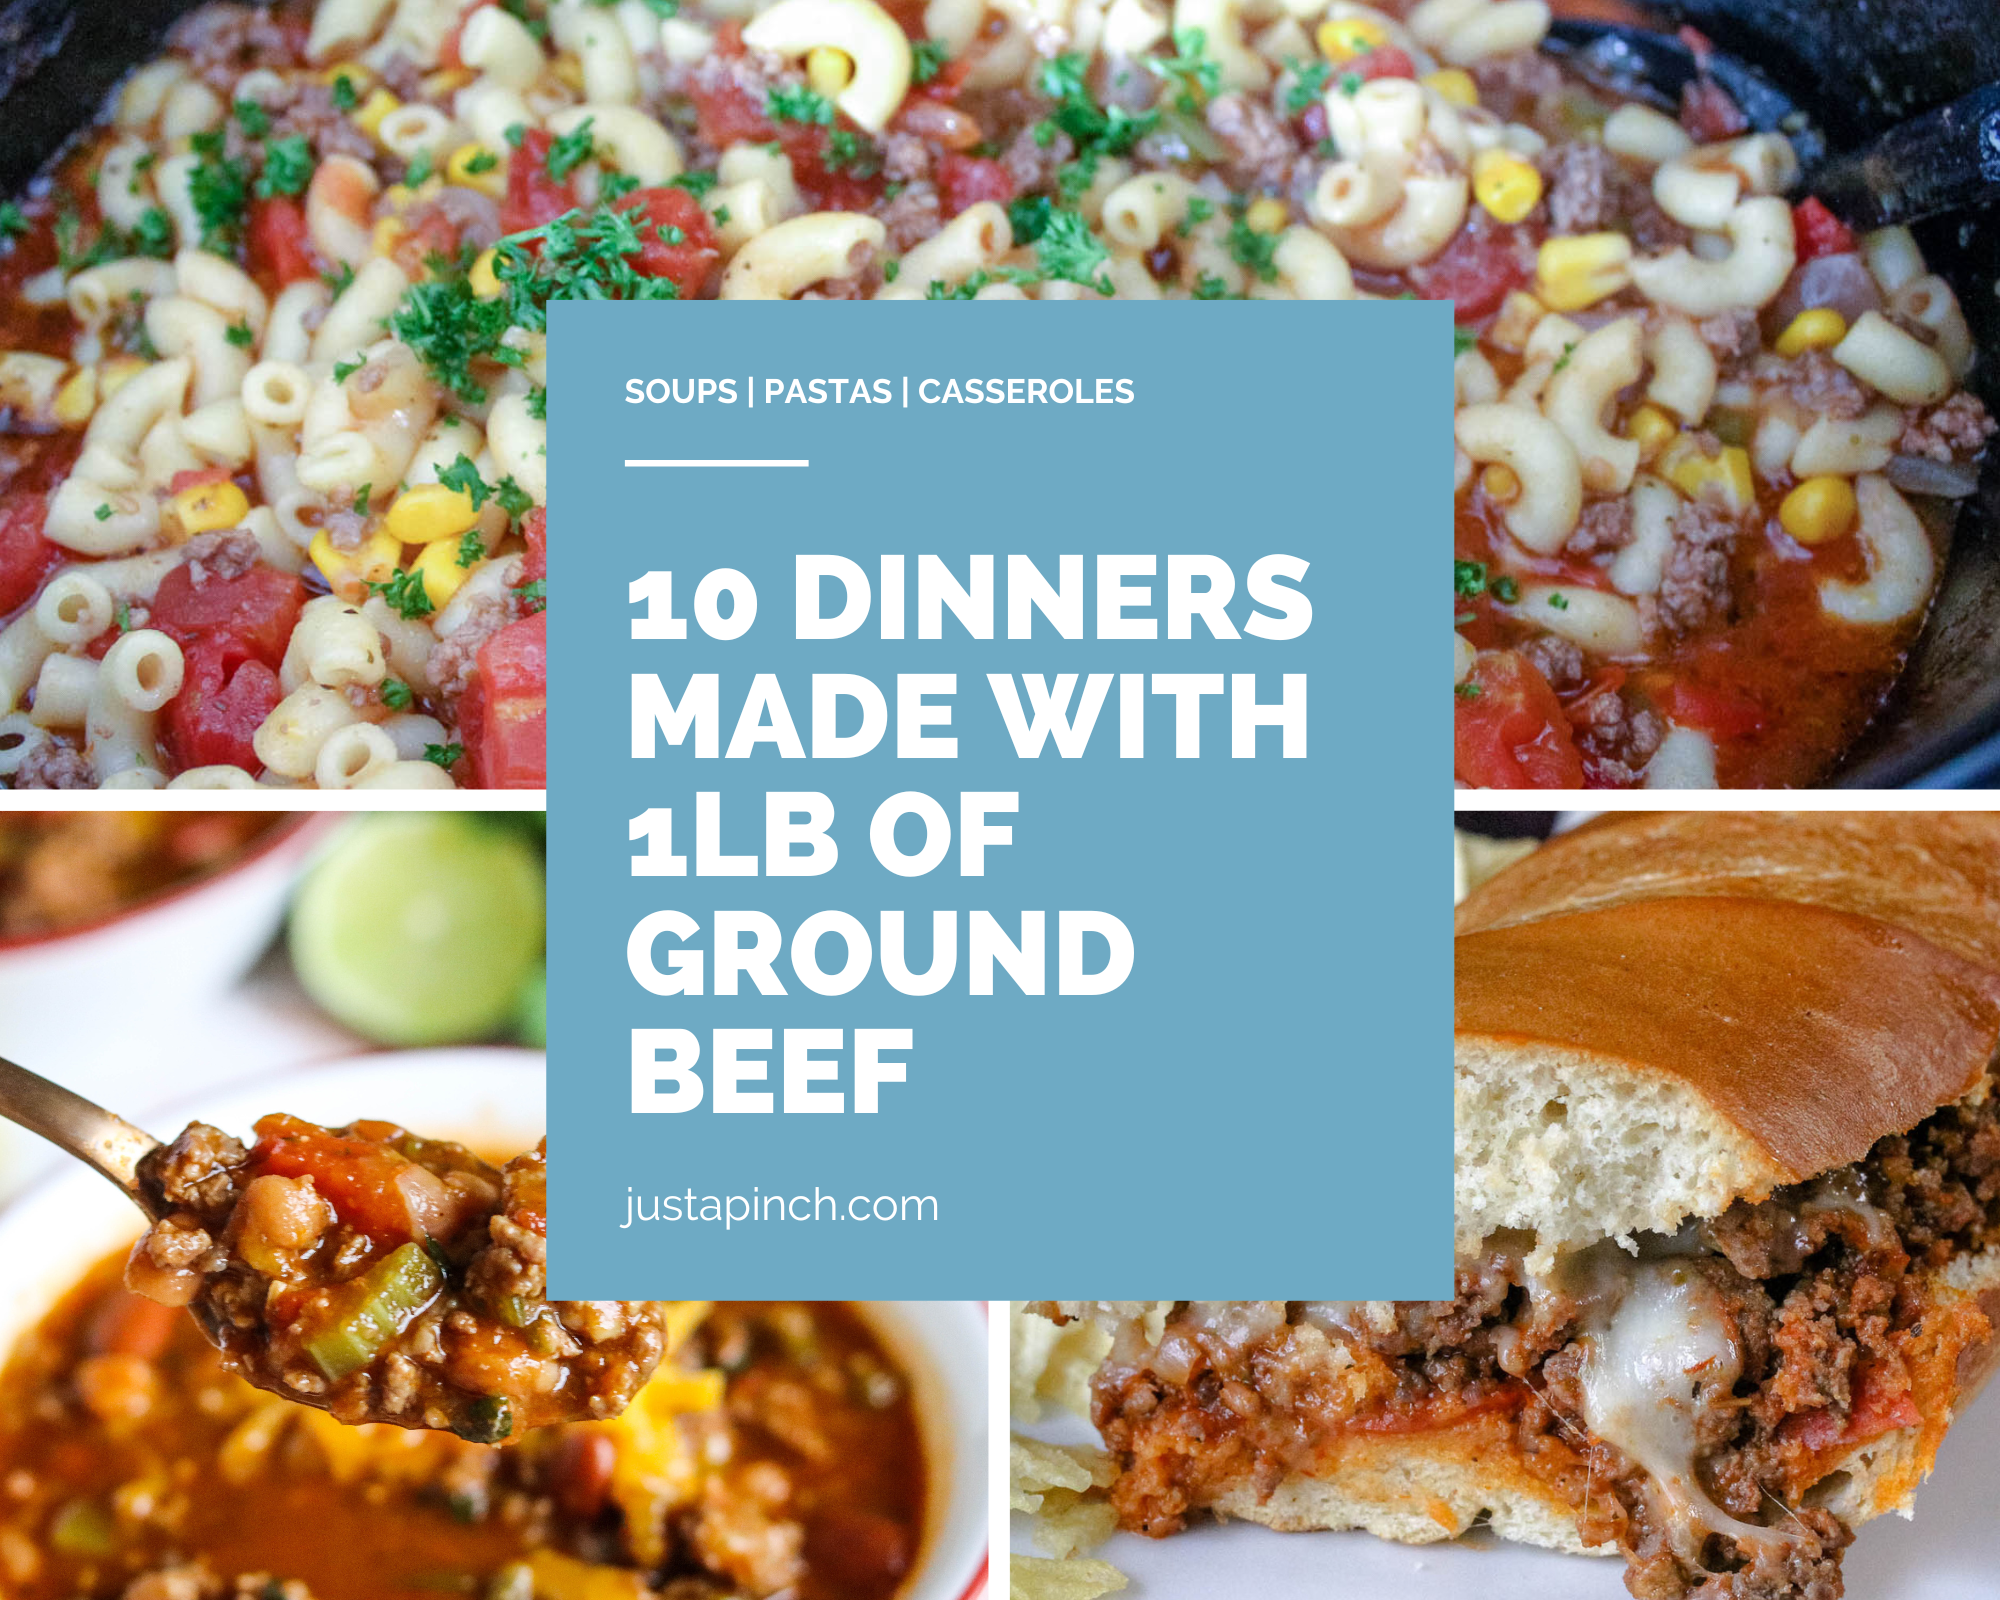 10 Dinners Made with 1lb of Ground Beef